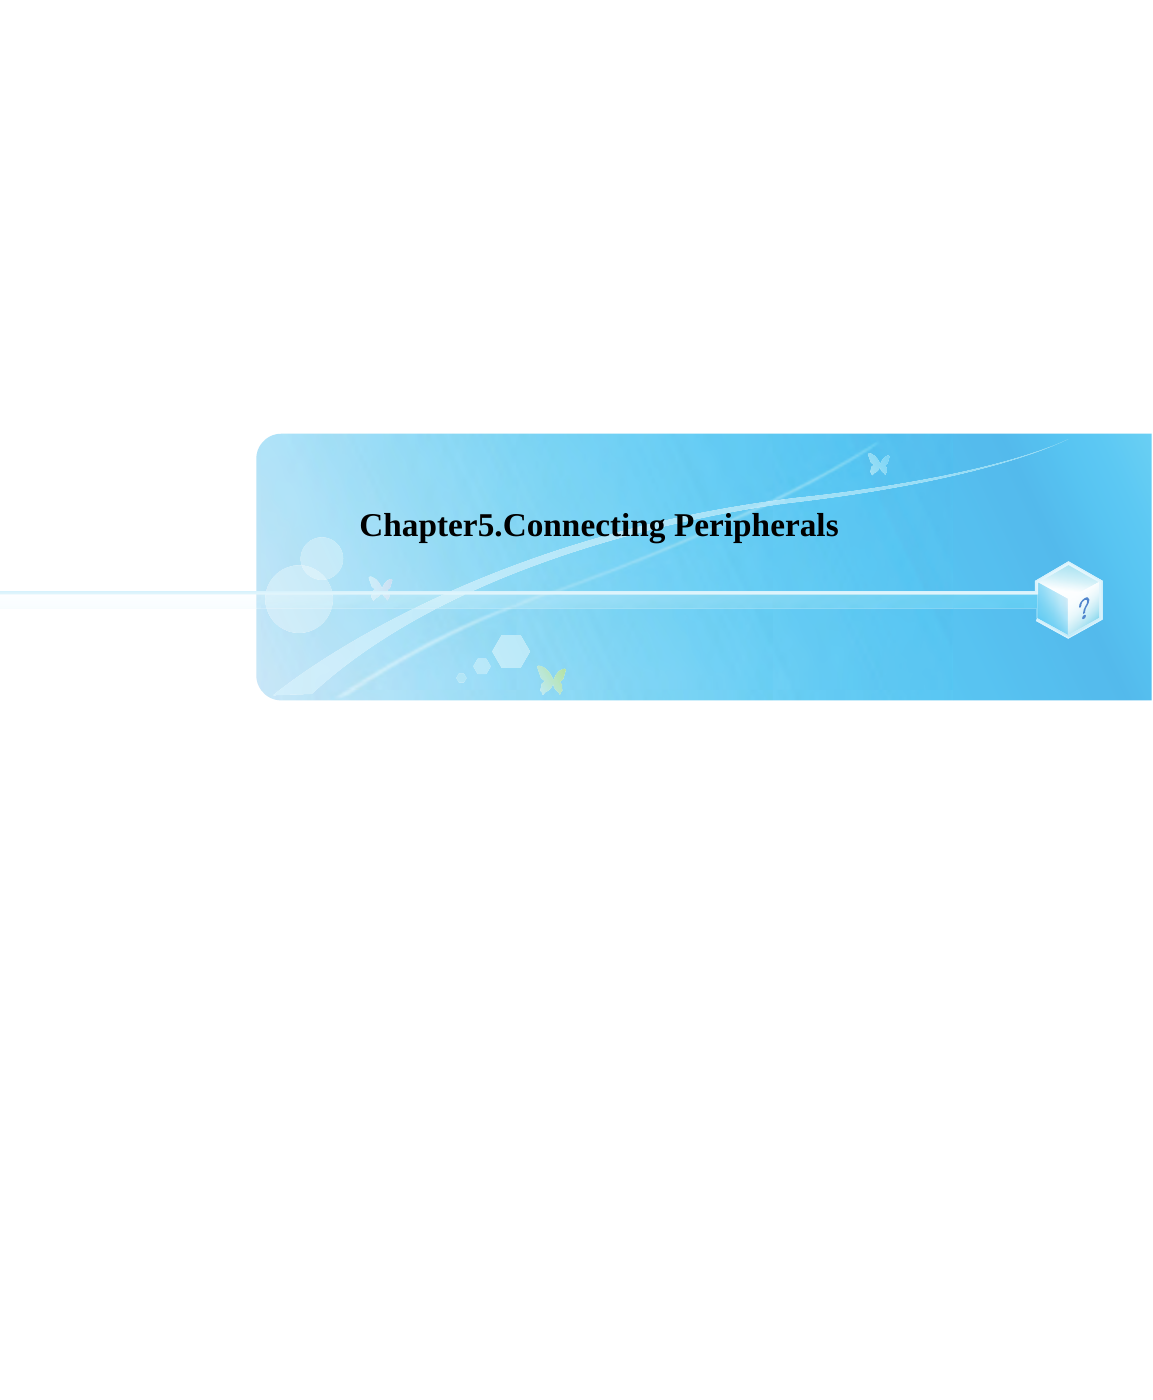 Chapter5.Connecting Peripherals